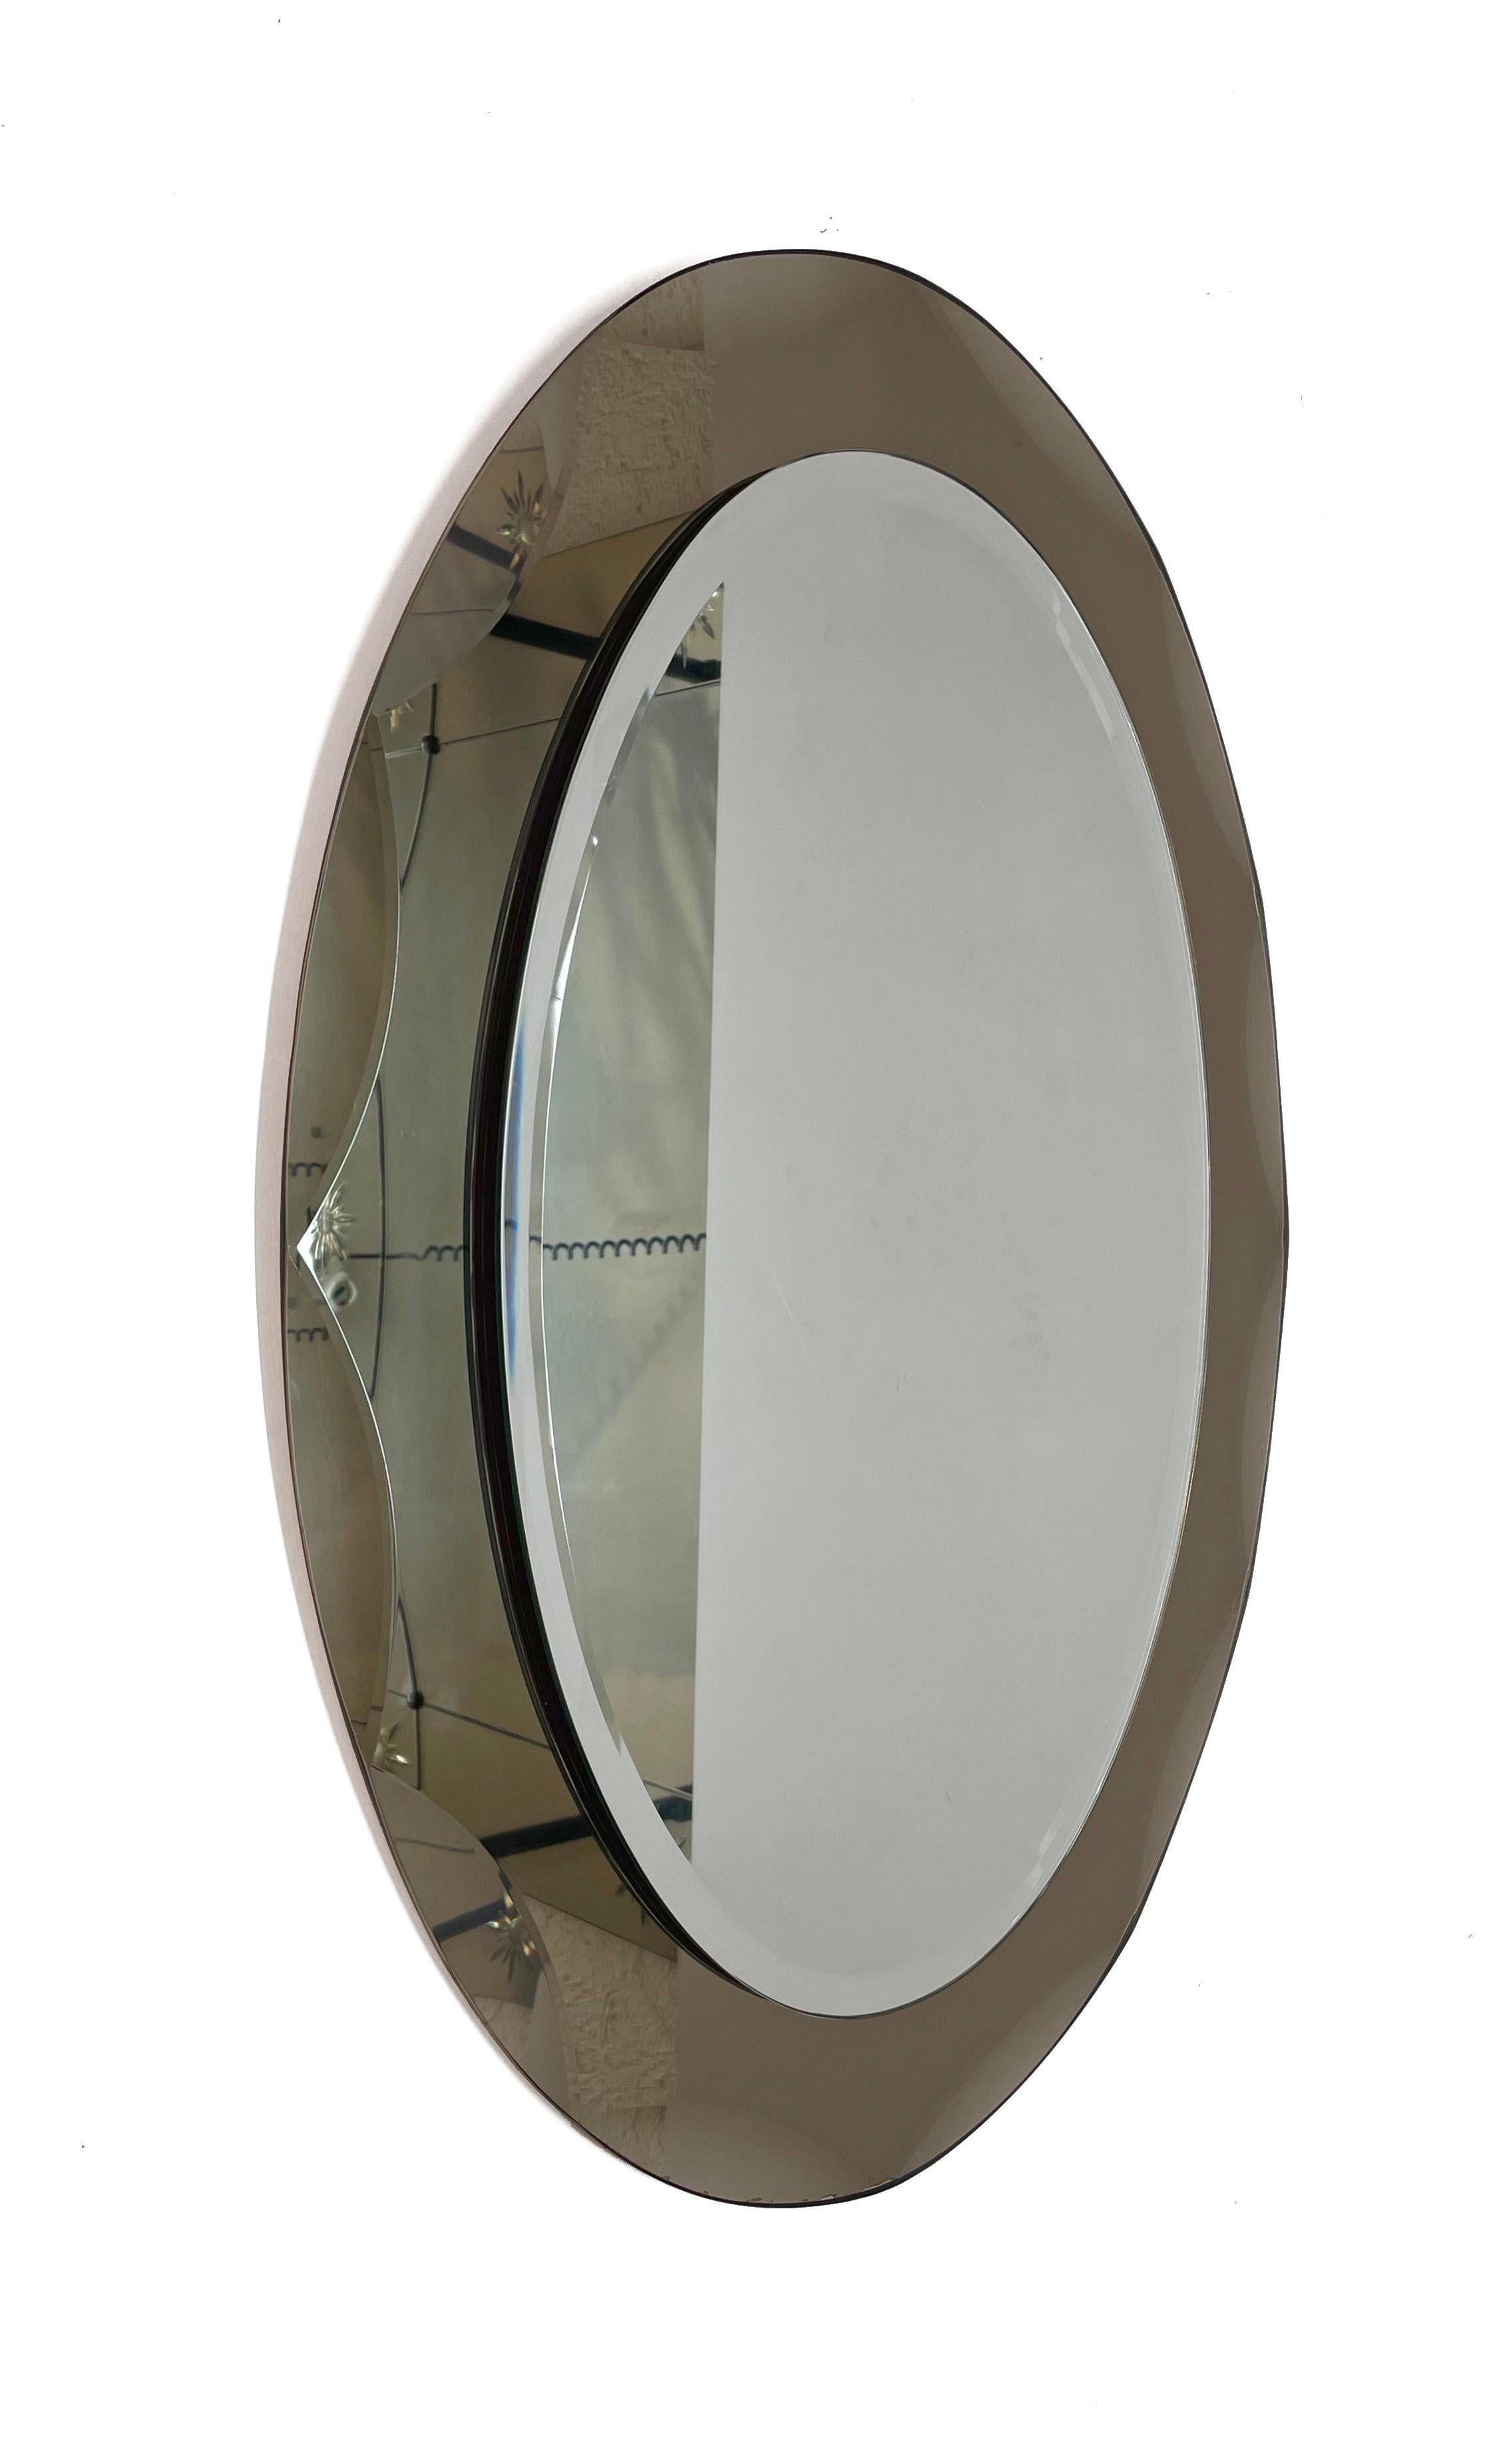 Midcentury Cristal Arte Italian Oval Mirror with Graven Bronzed Frame, 1960s For Sale 2